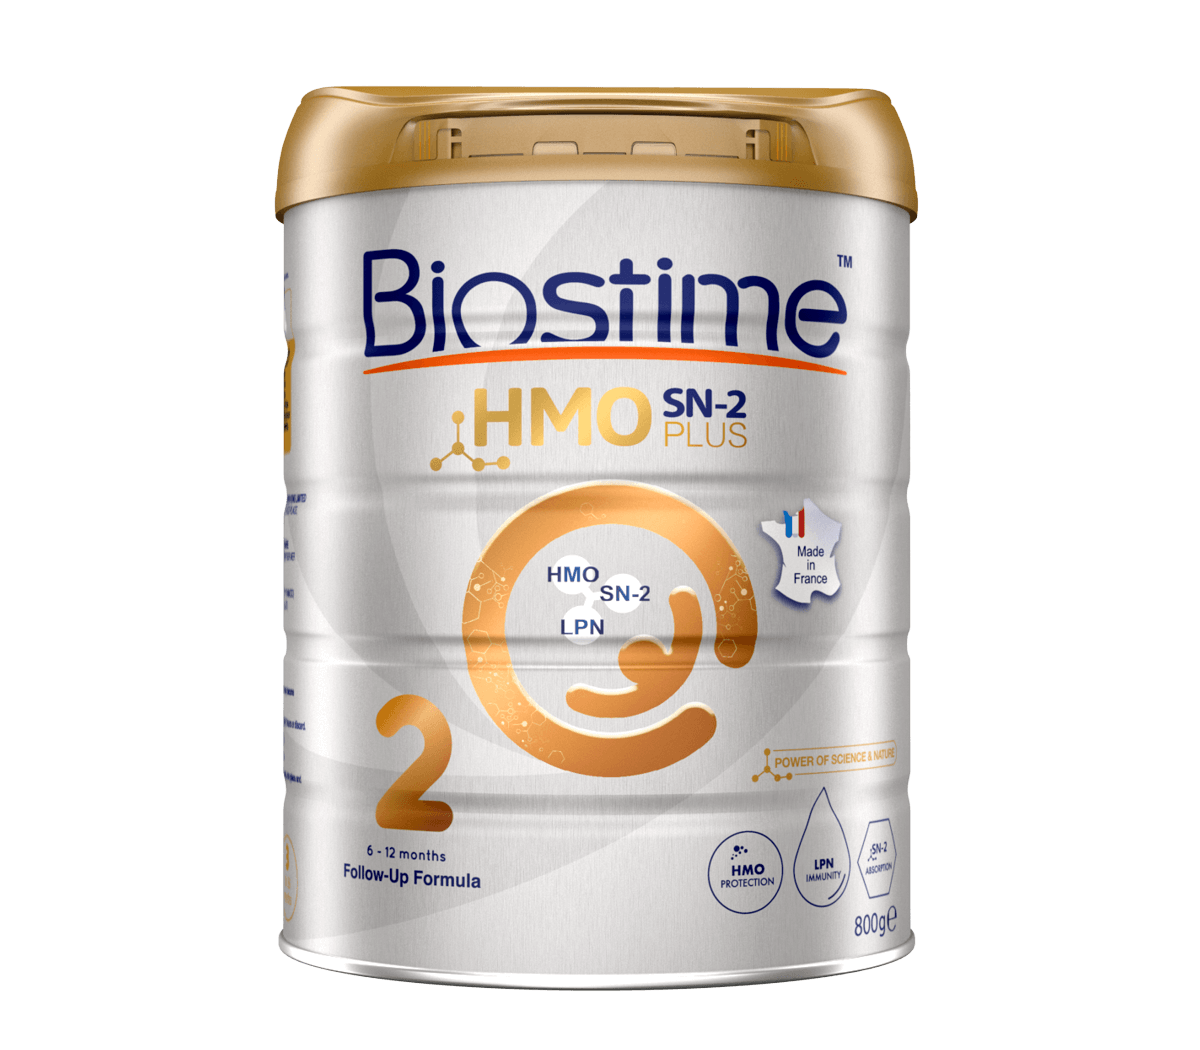 BIOSTIME's New Product Launches Aim at Mother & Baby High-Growth